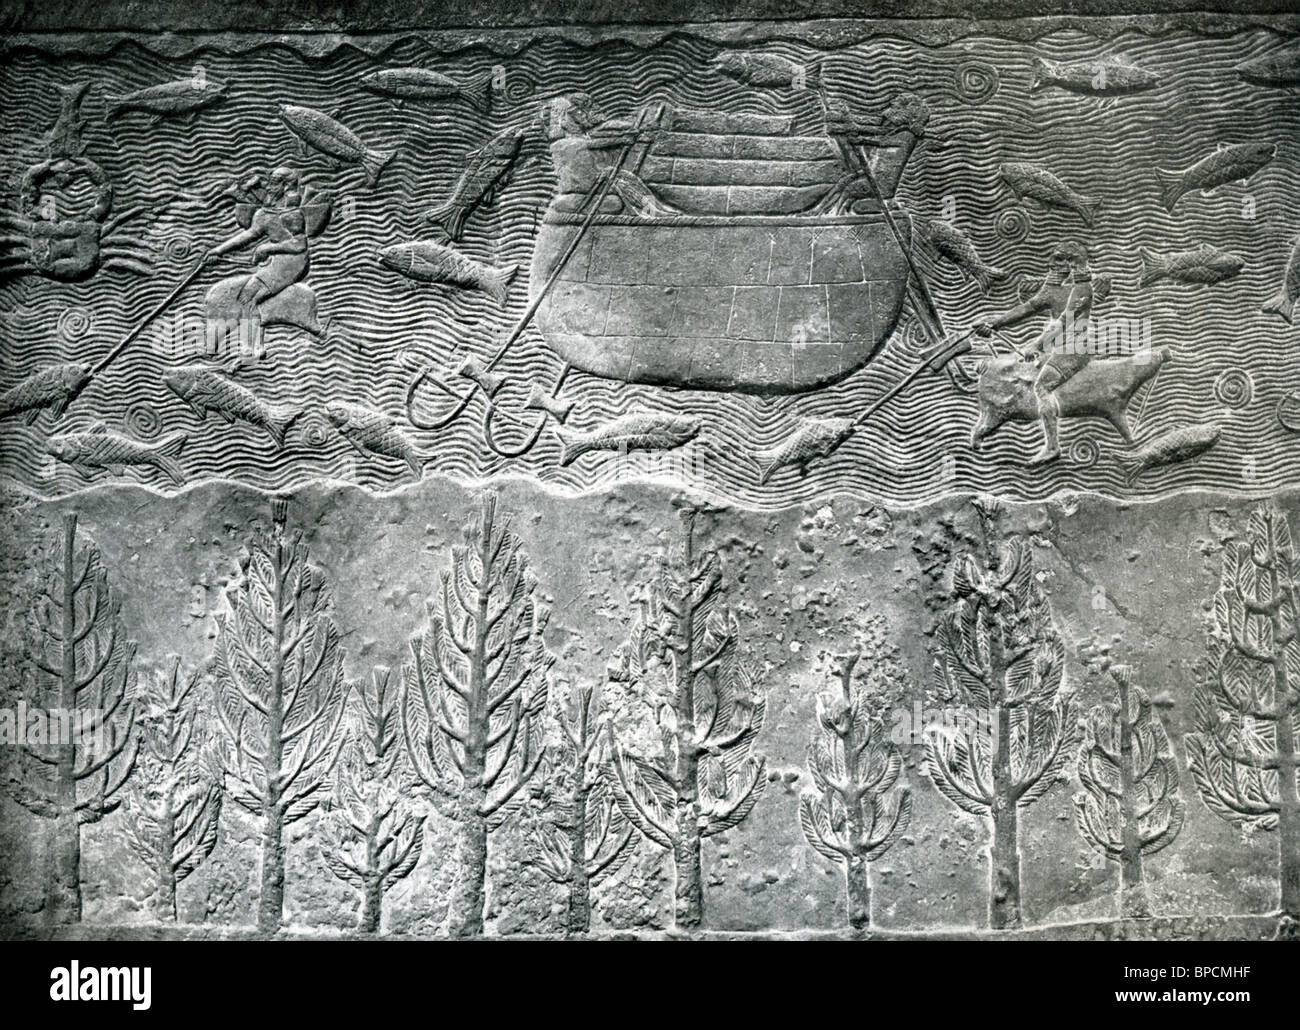 This relief, from the palace of Sennacherib at Nineveh, the capital of ancient Assyria, has a barrel-shaped boat with fishermen. Stock Photo